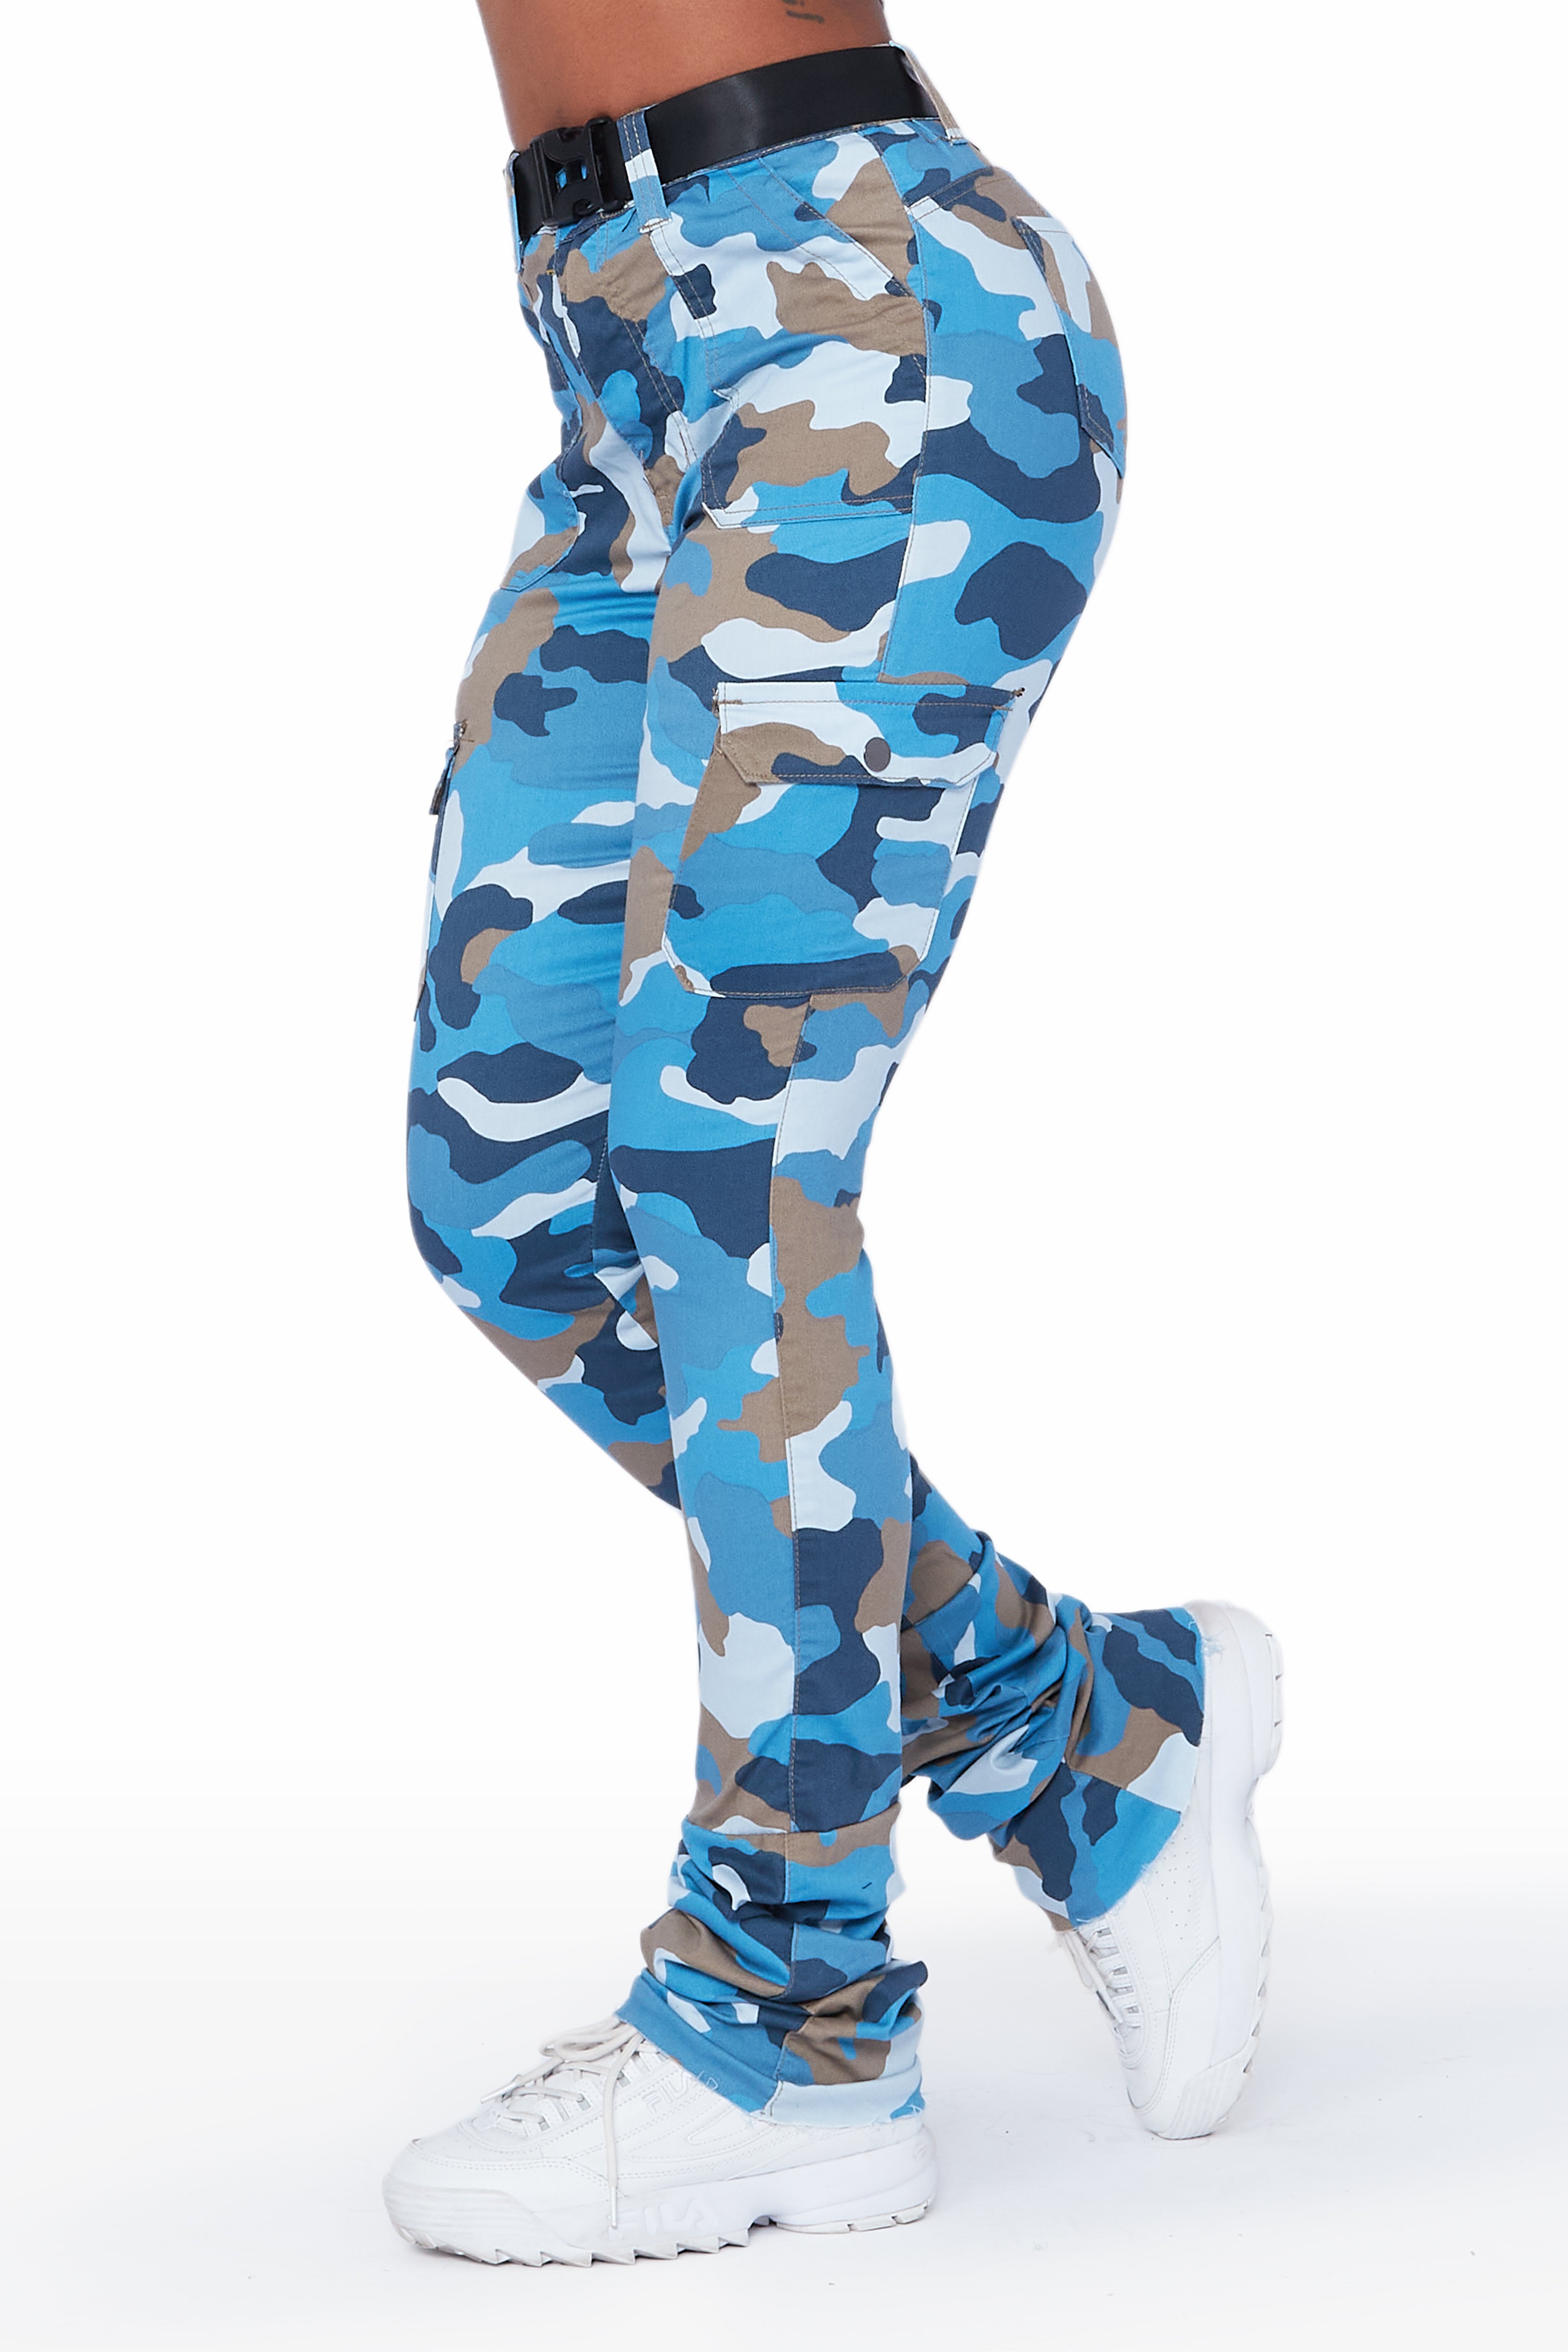 Avah Blue Camo Super Stacked Jean